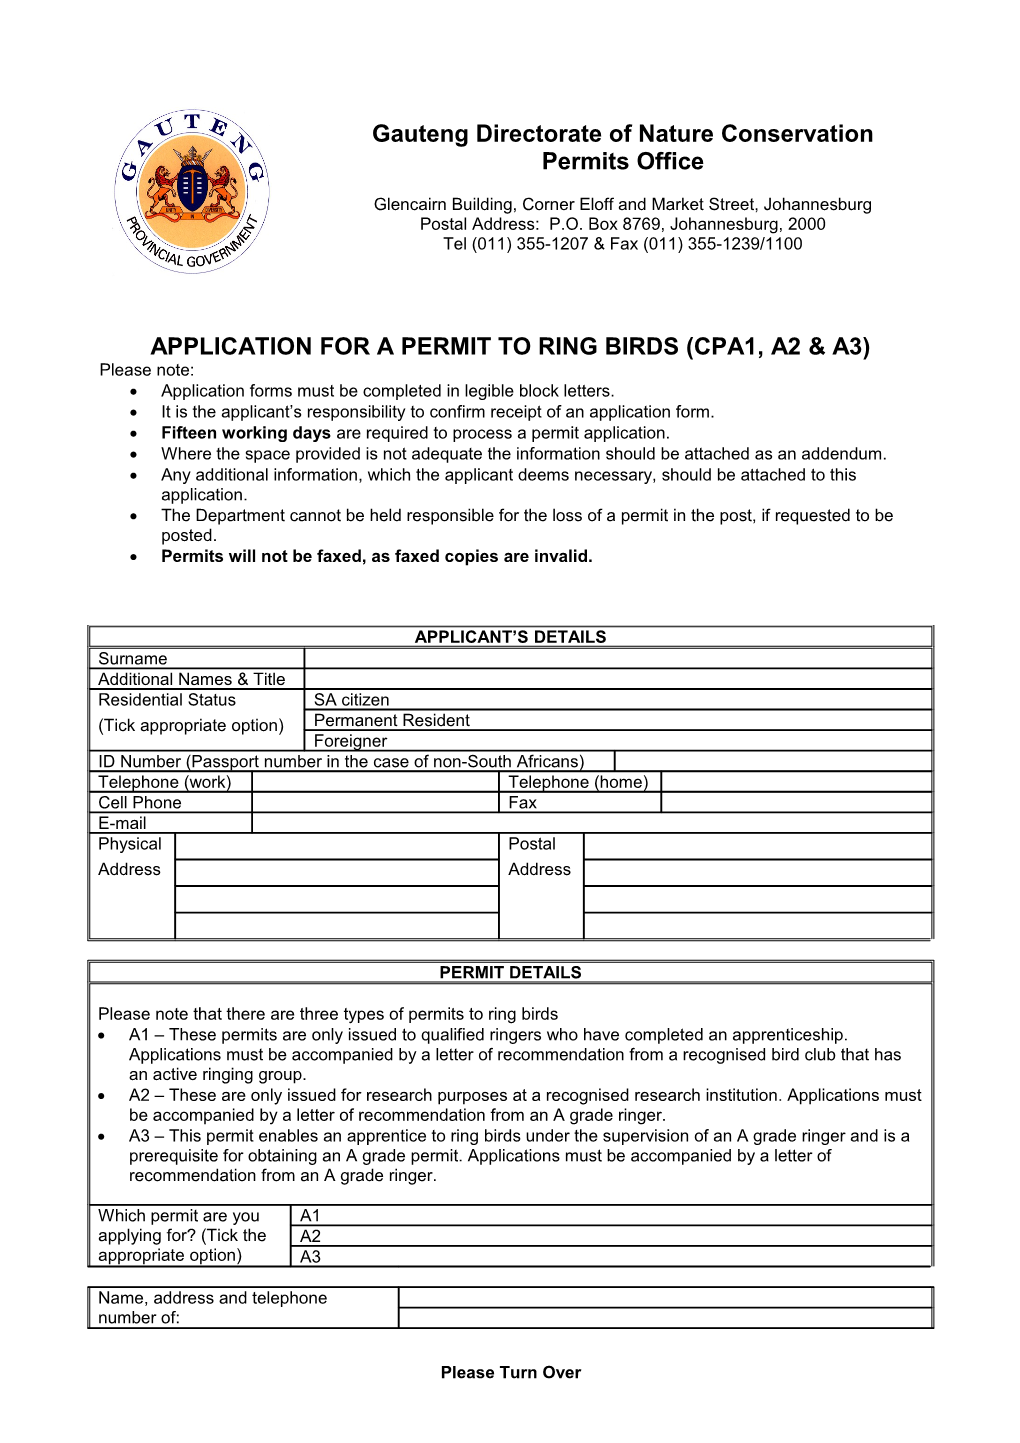 Application for a Permit to Ring Birds (Cpa1, A2 & A3)